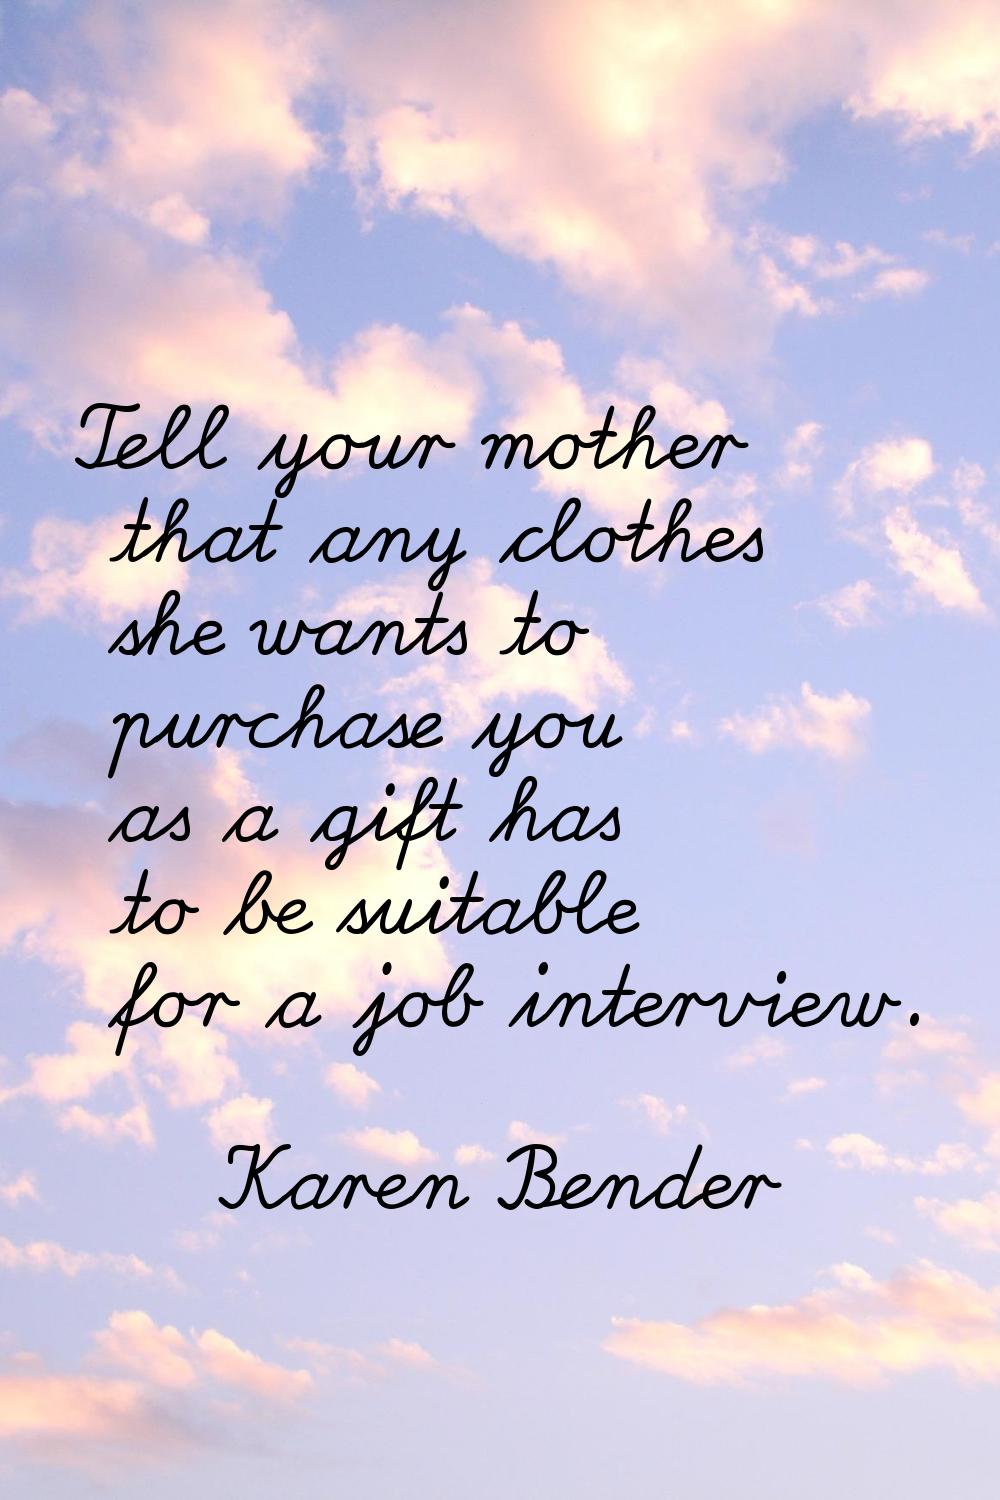 Tell your mother that any clothes she wants to purchase you as a gift has to be suitable for a job 